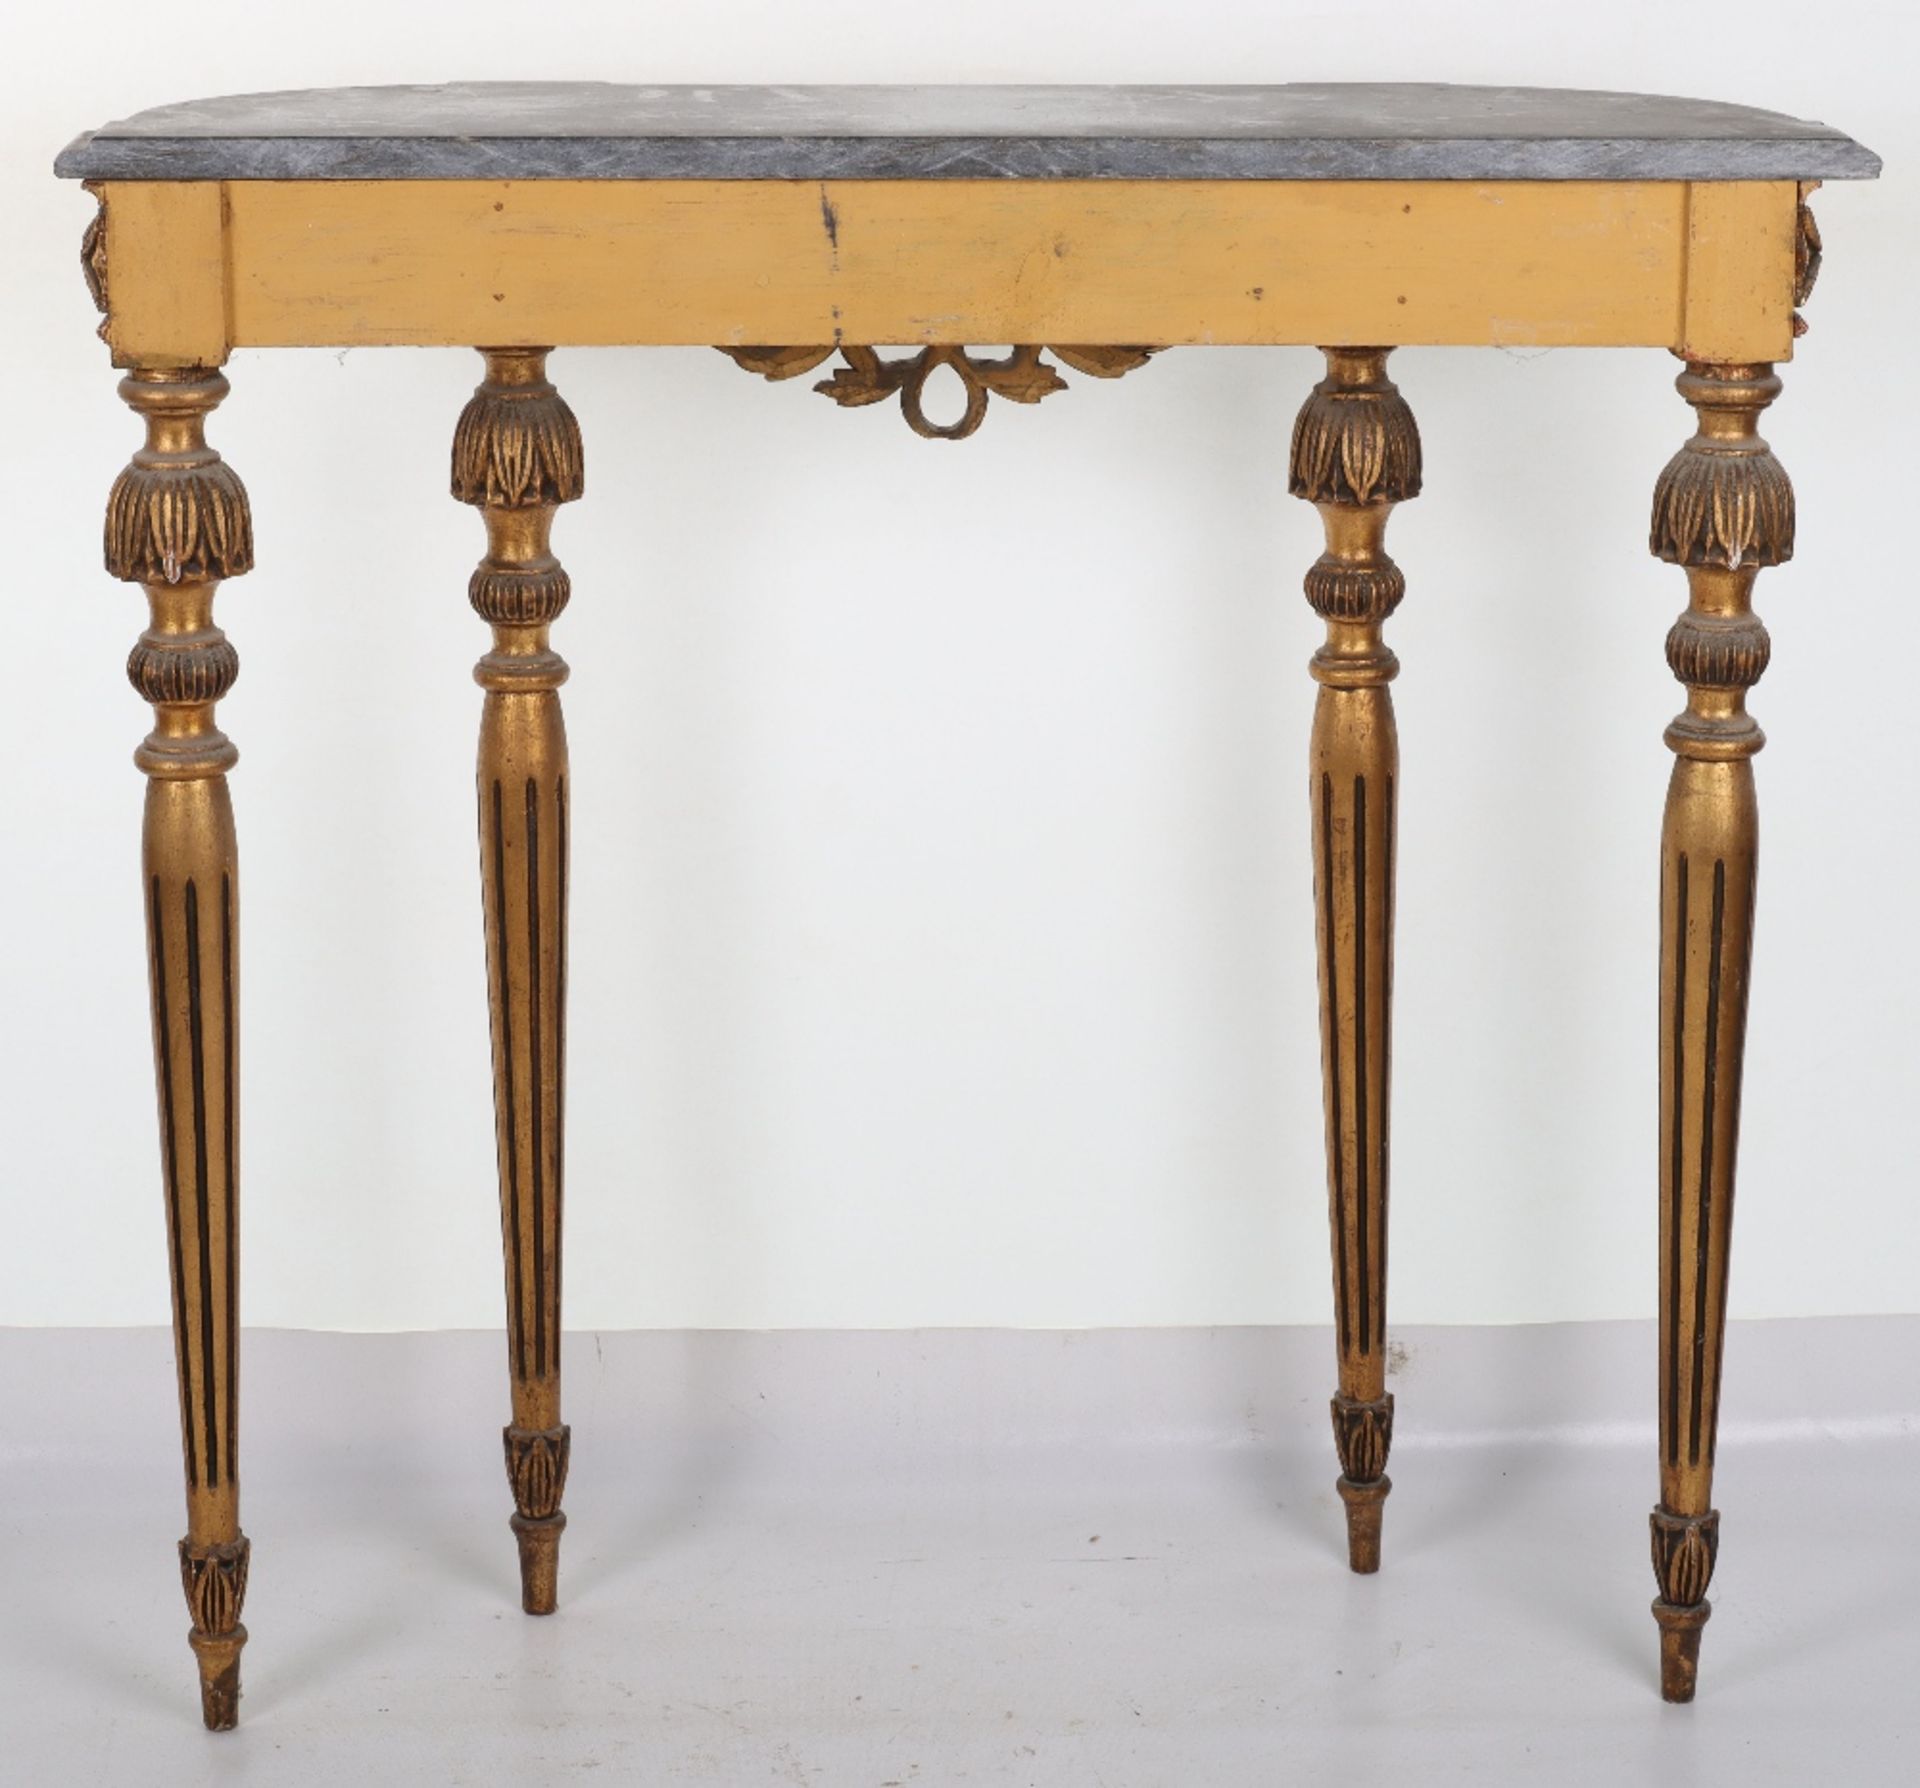 A French giltwood and marble top console table - Image 6 of 7